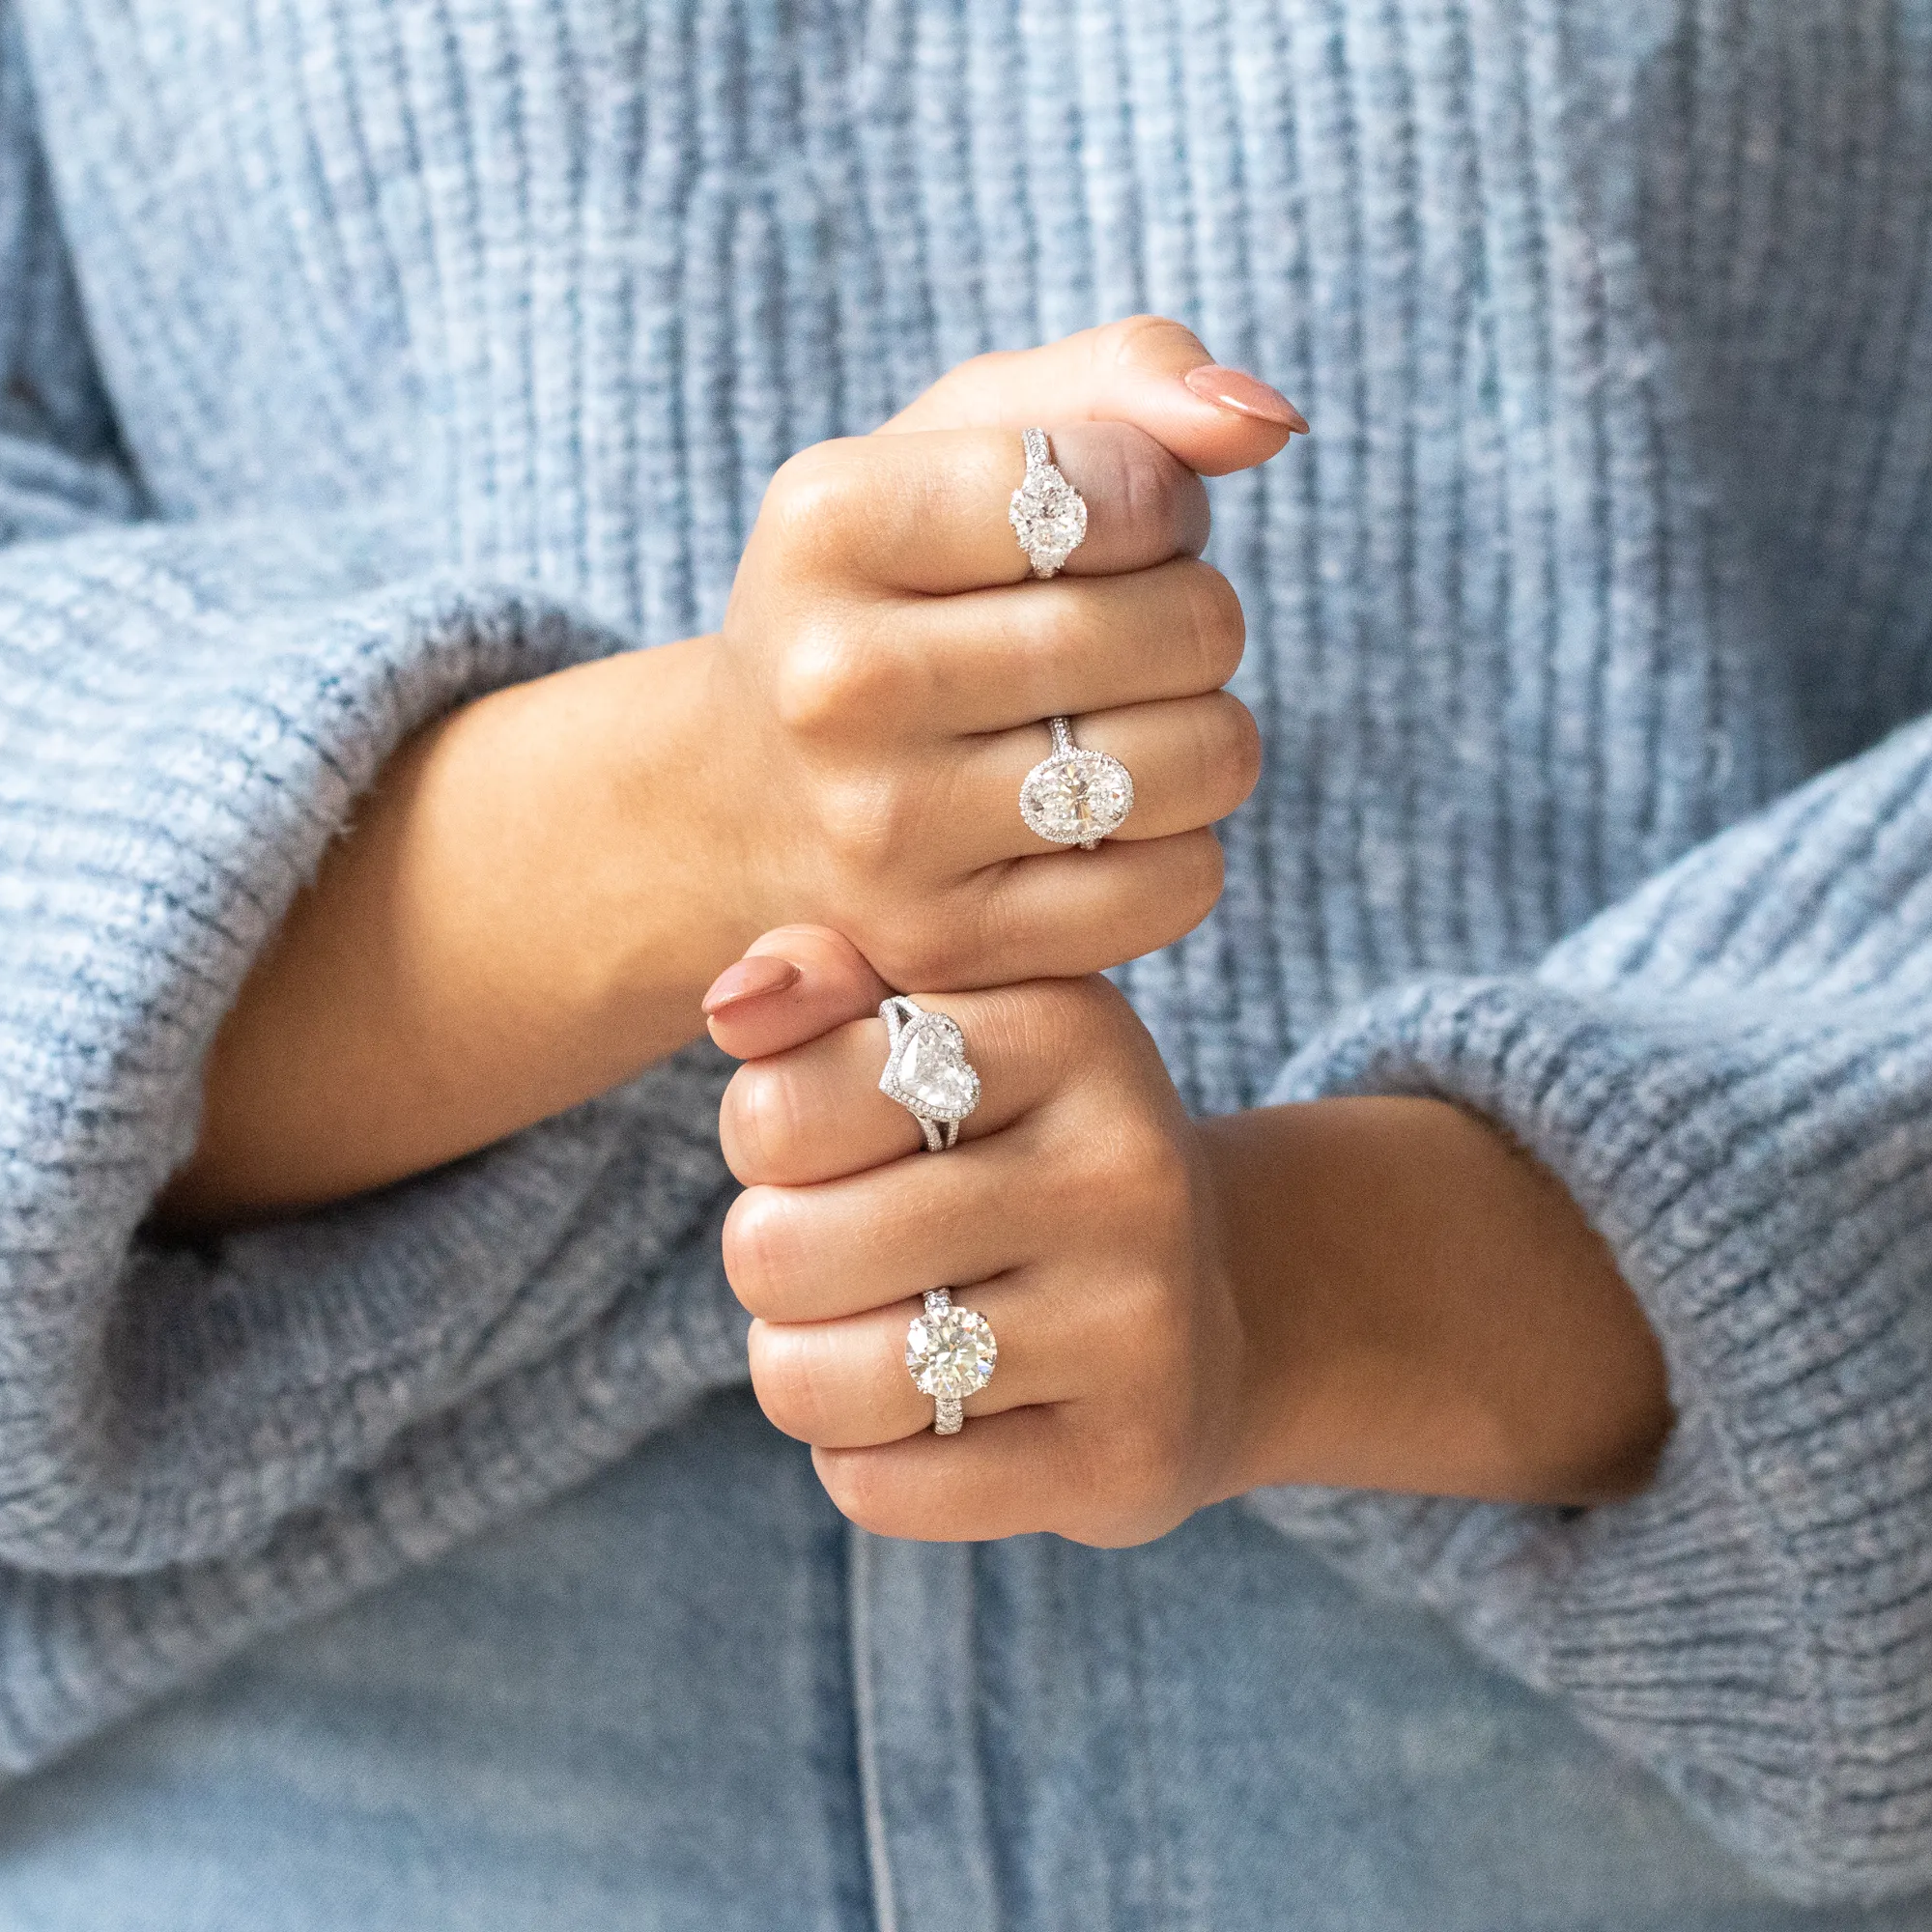 The Most Popular Shapes for Engagement Rings